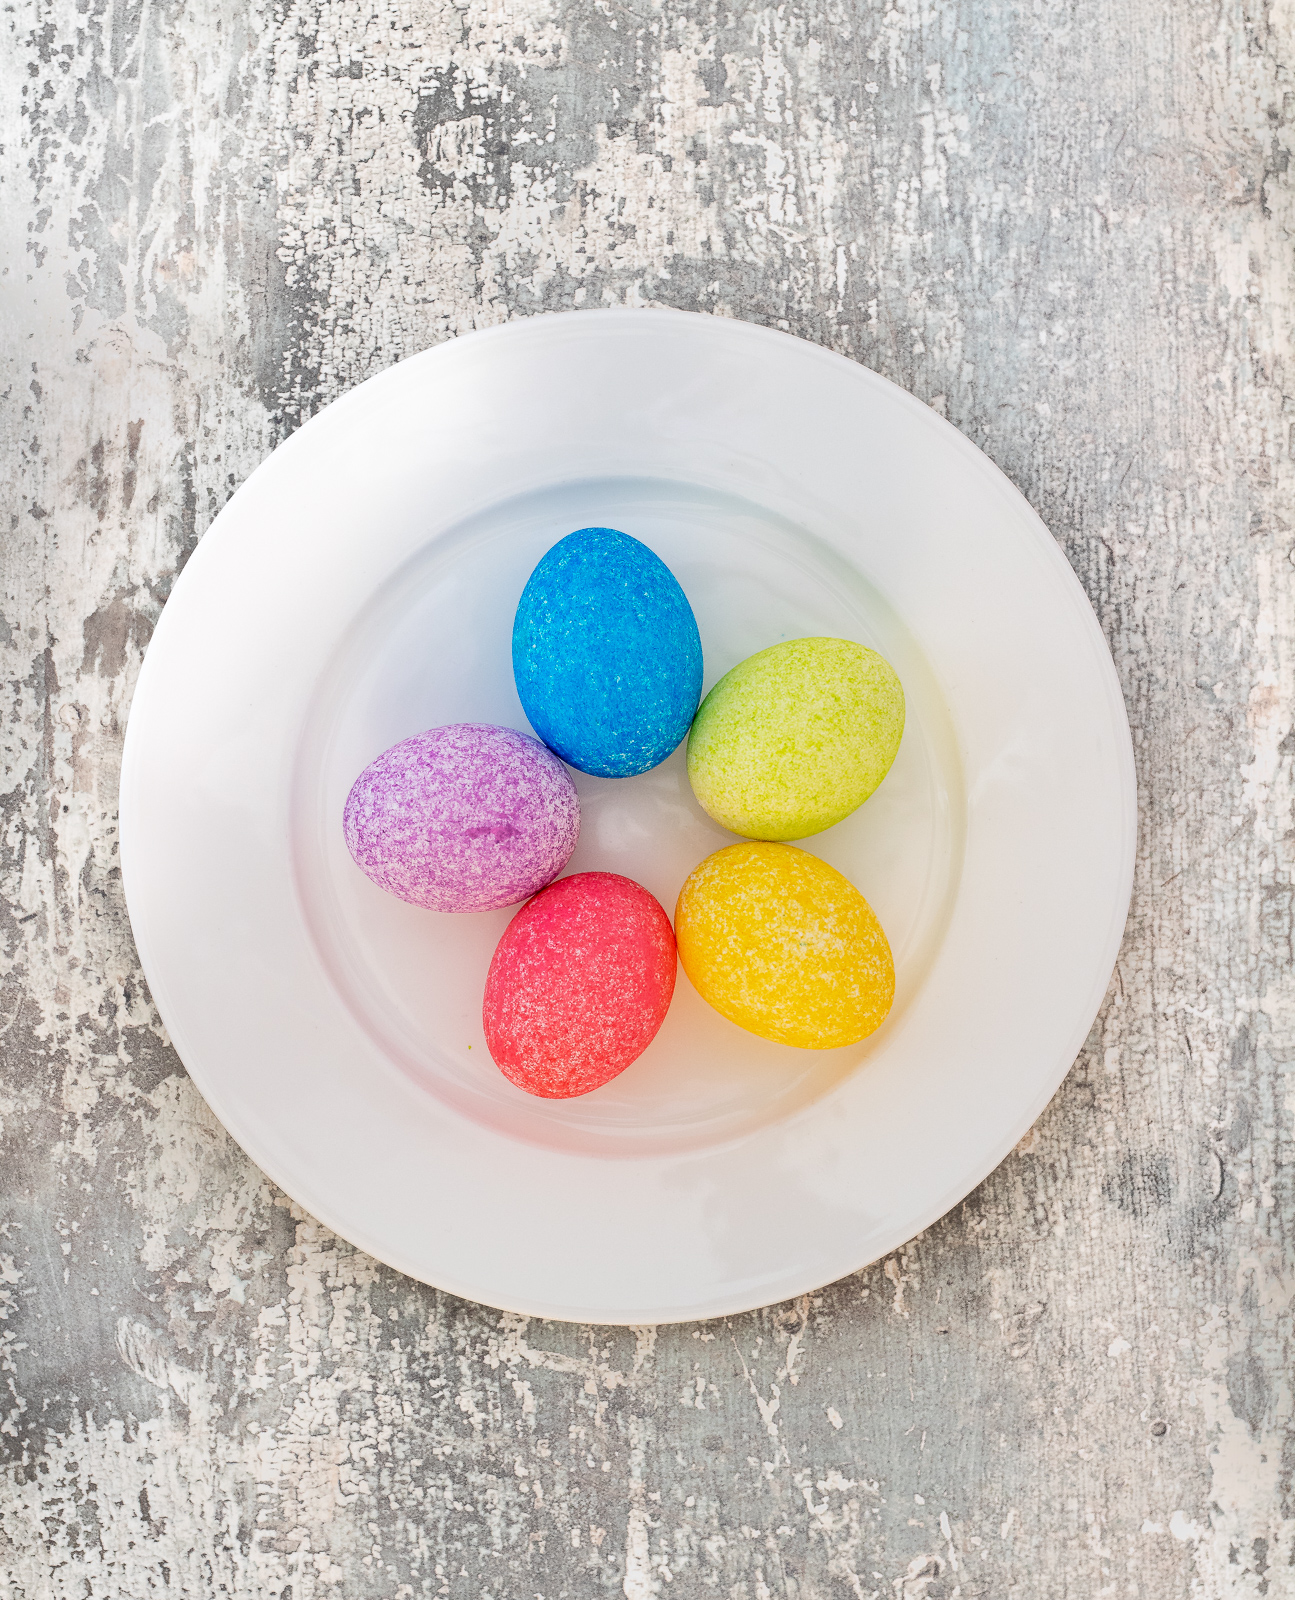 Using rice to dye Easter eggs